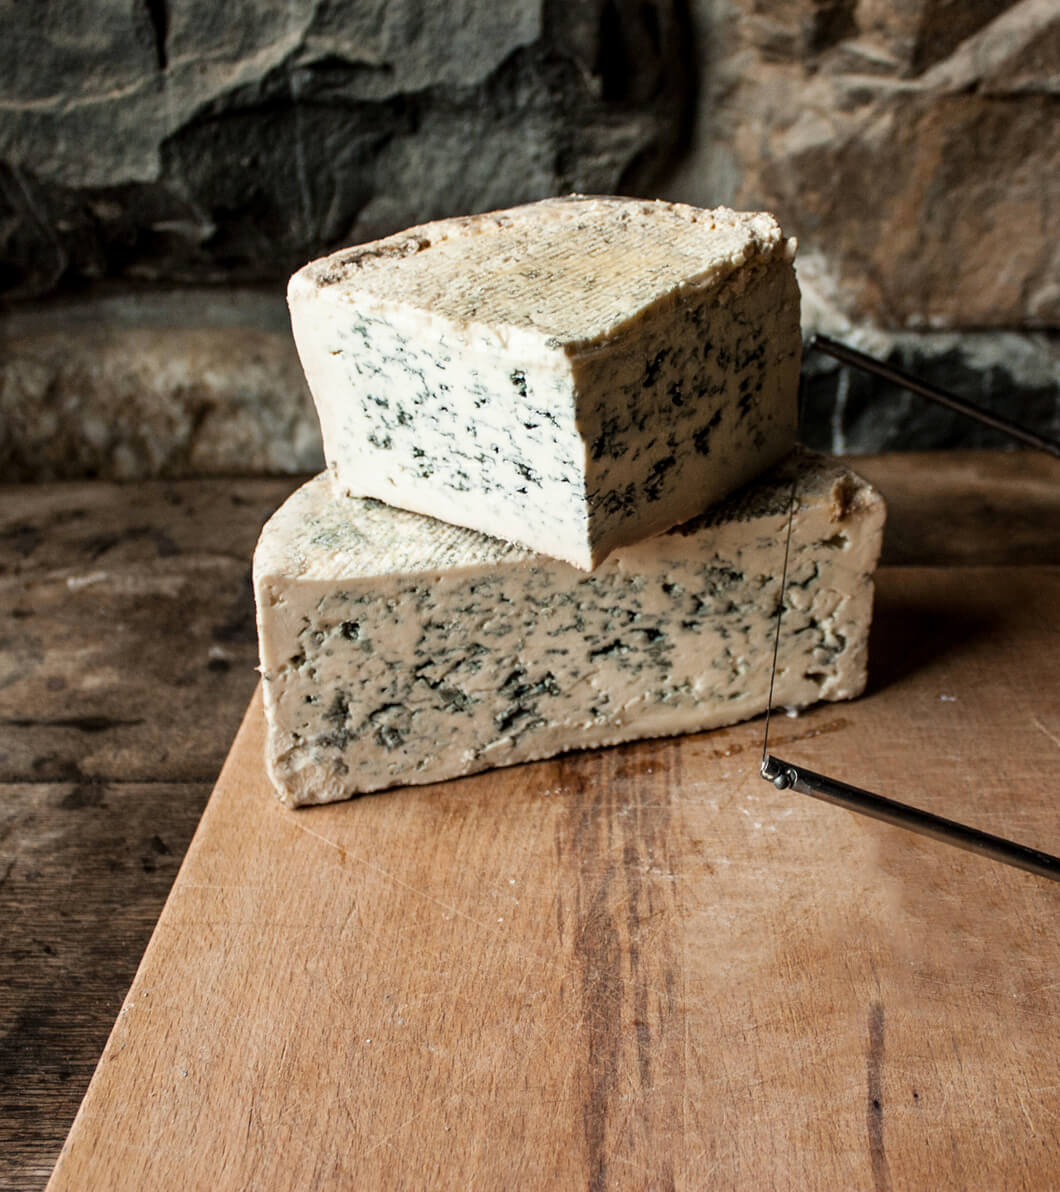 BLUE GOAT CHEESE